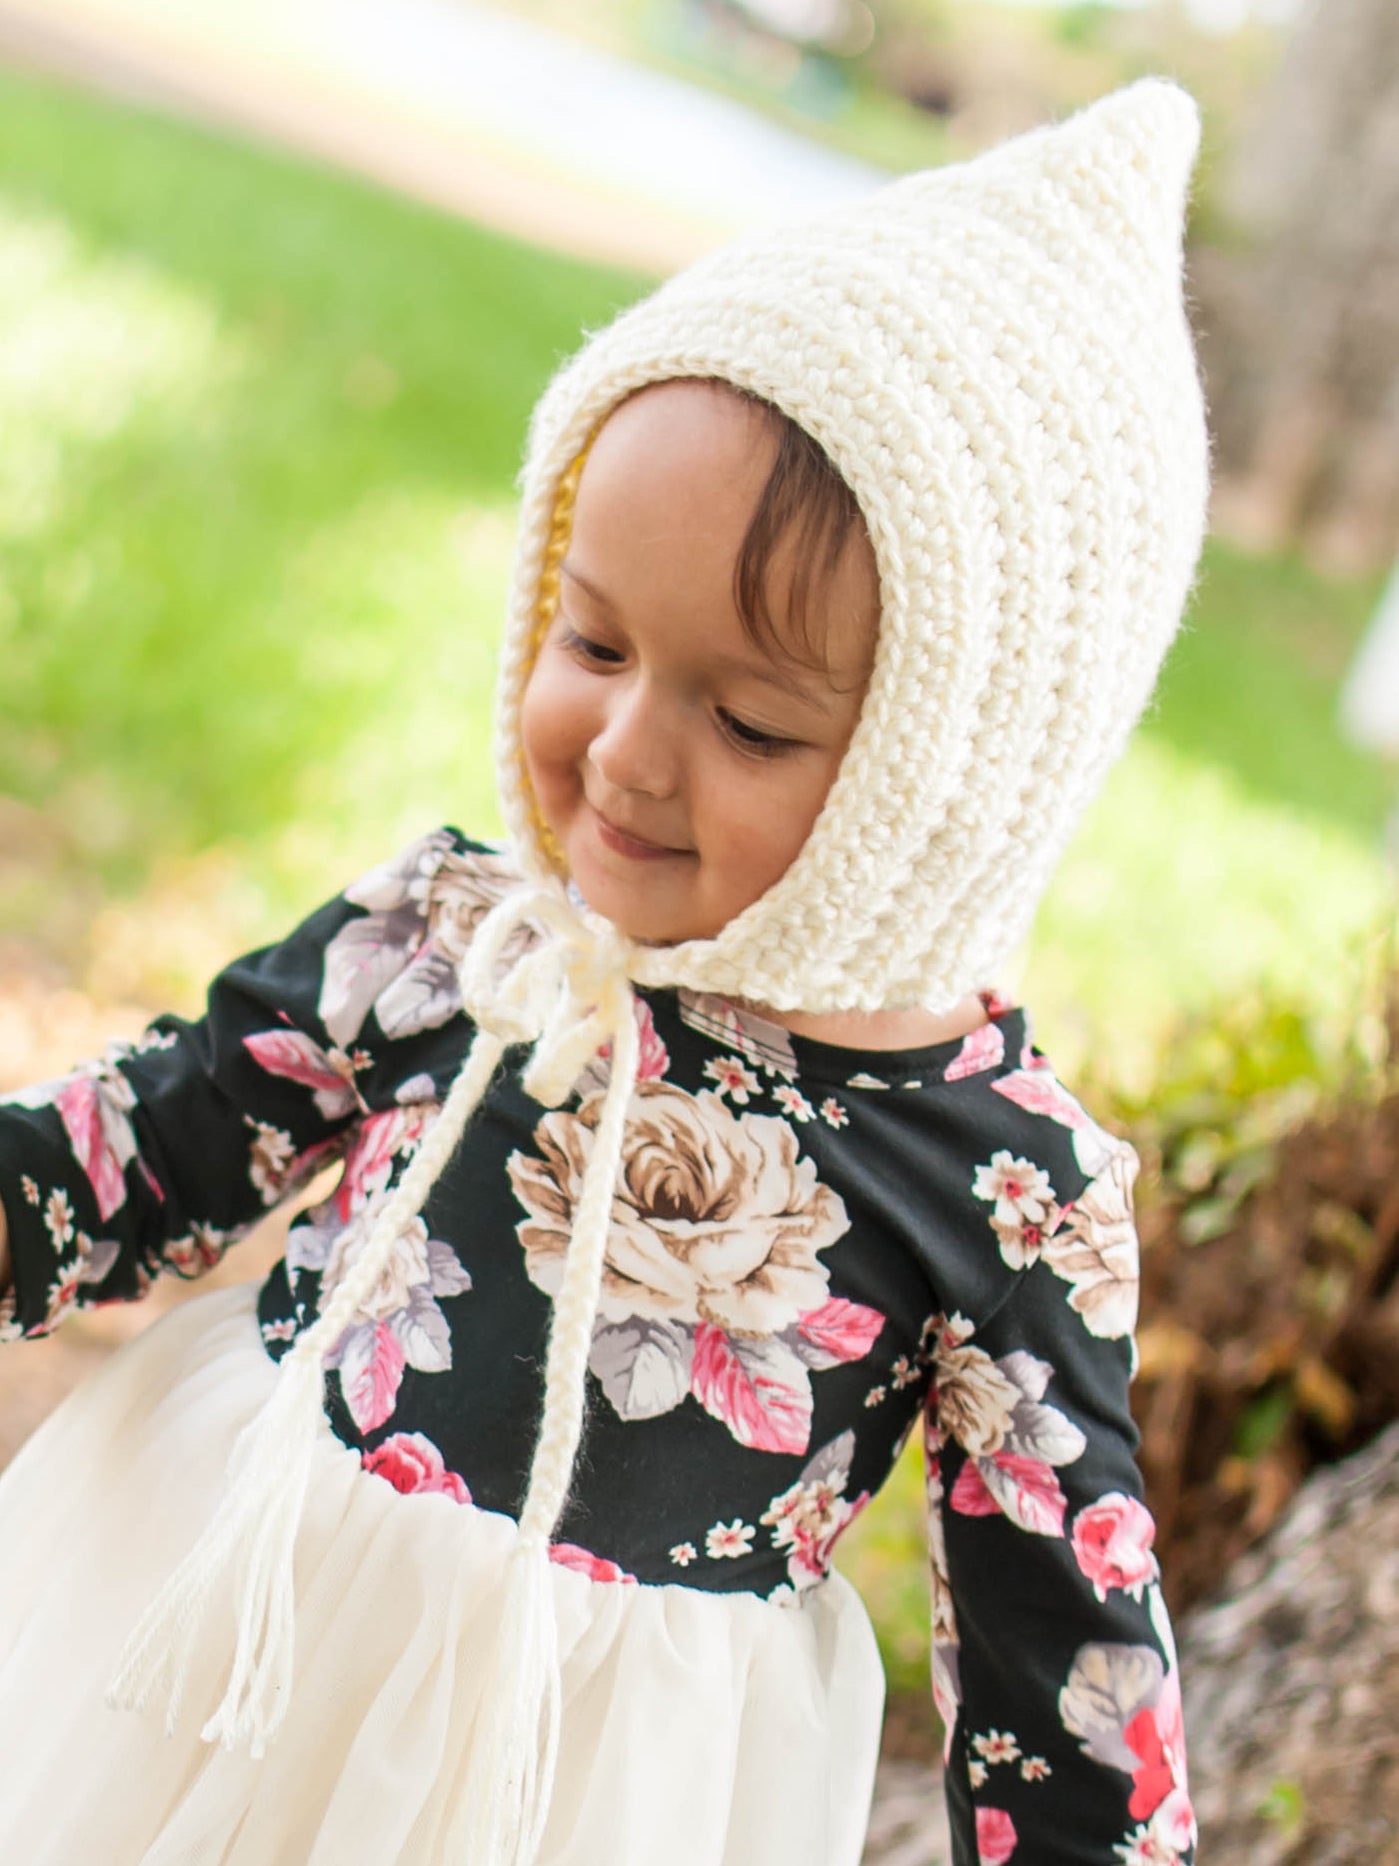 Ivory cream pixie elf hat by Two Seaside Babes